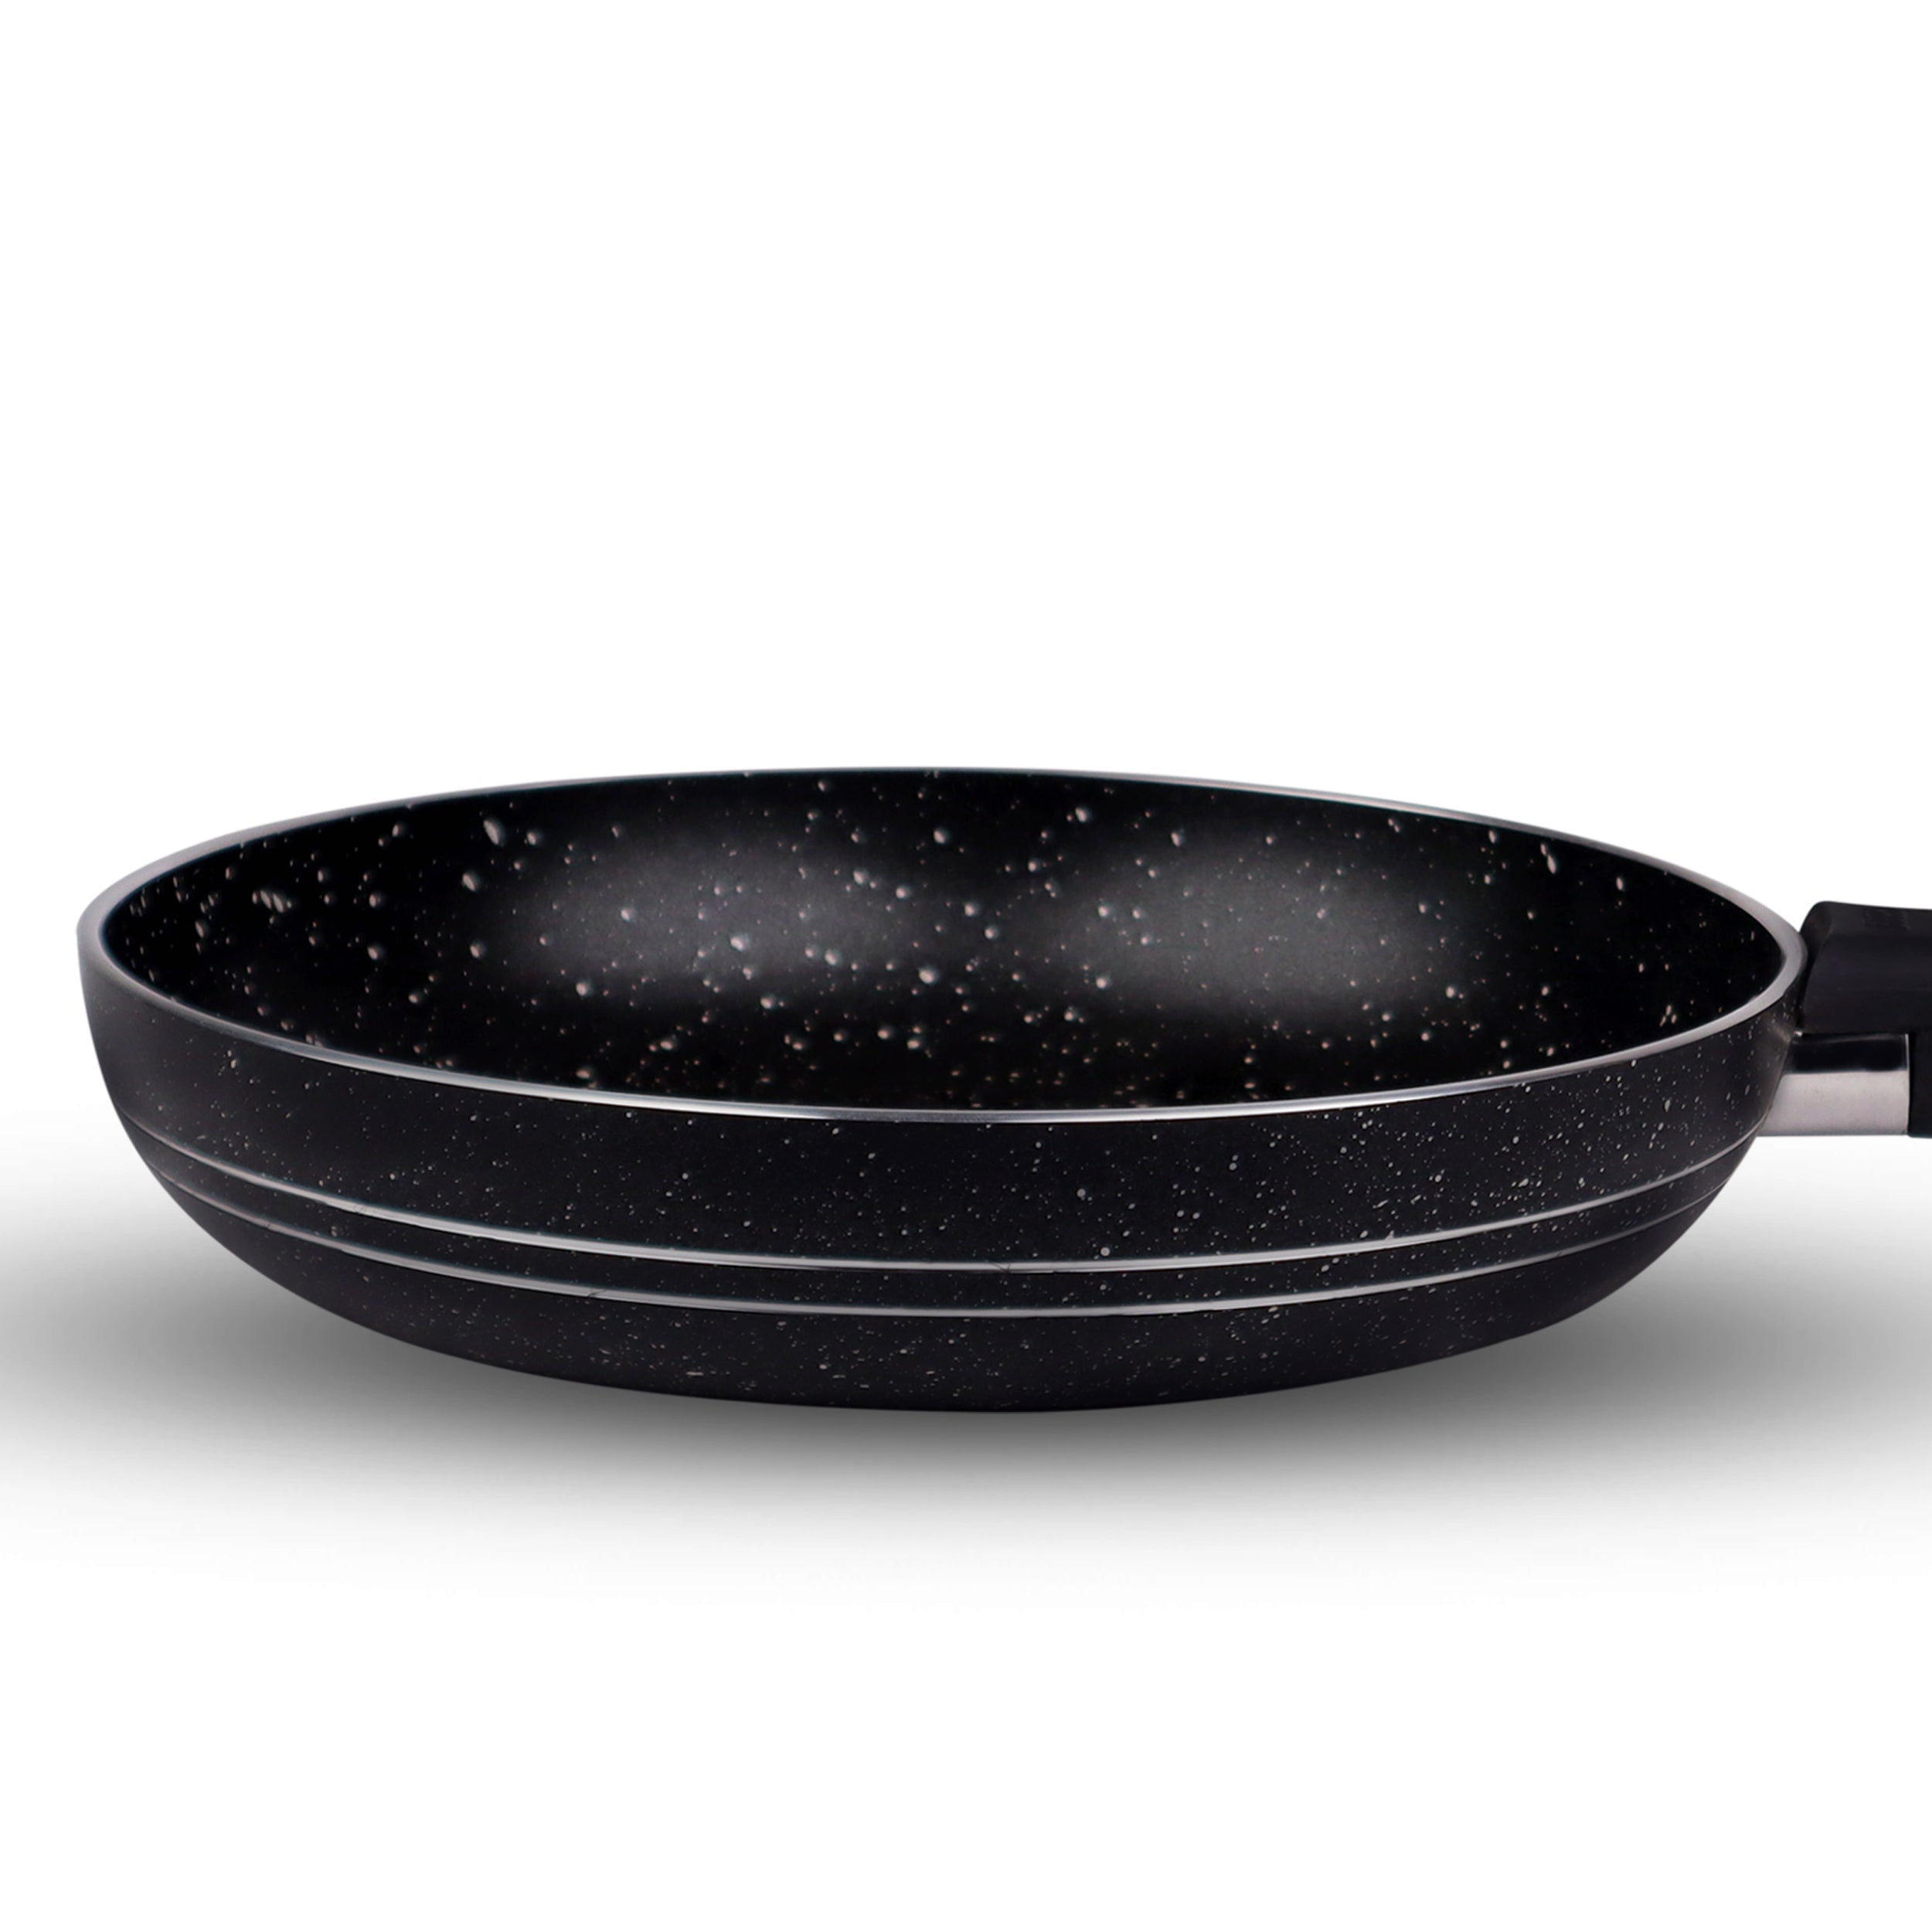 chef best quality non stick cooking pan \ marble coating 4mm frying pan with strong grip handle - chef cookware 